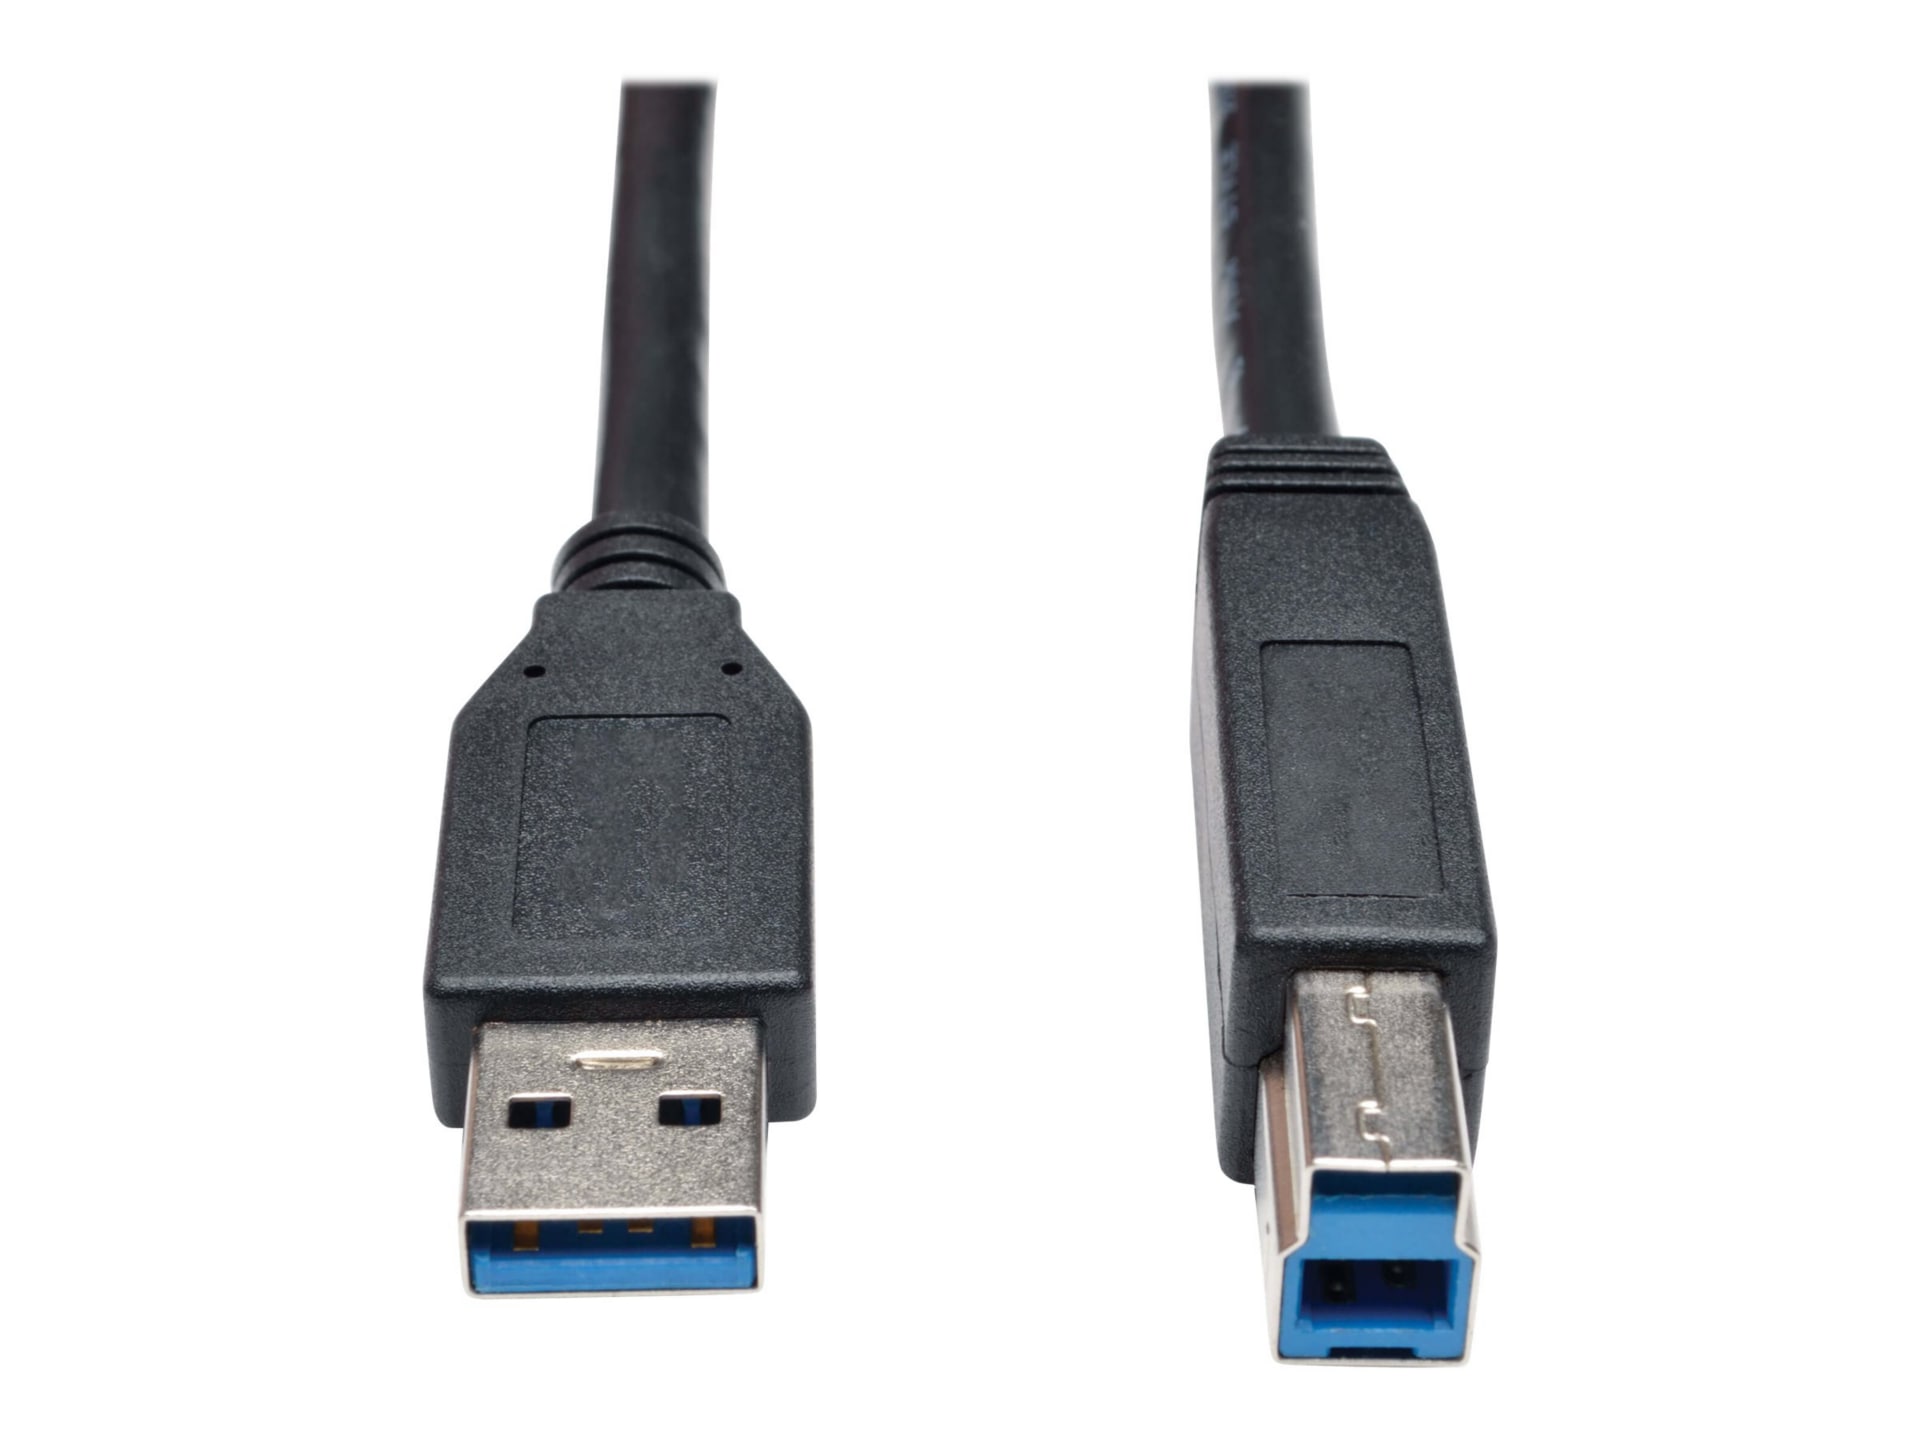 Eaton Tripp Lite Series USB 3.2 Gen 1 SuperSpeed Device Cable (A to B M/M) Black, 15 ft. (4.57 m) - USB cable - USB Type